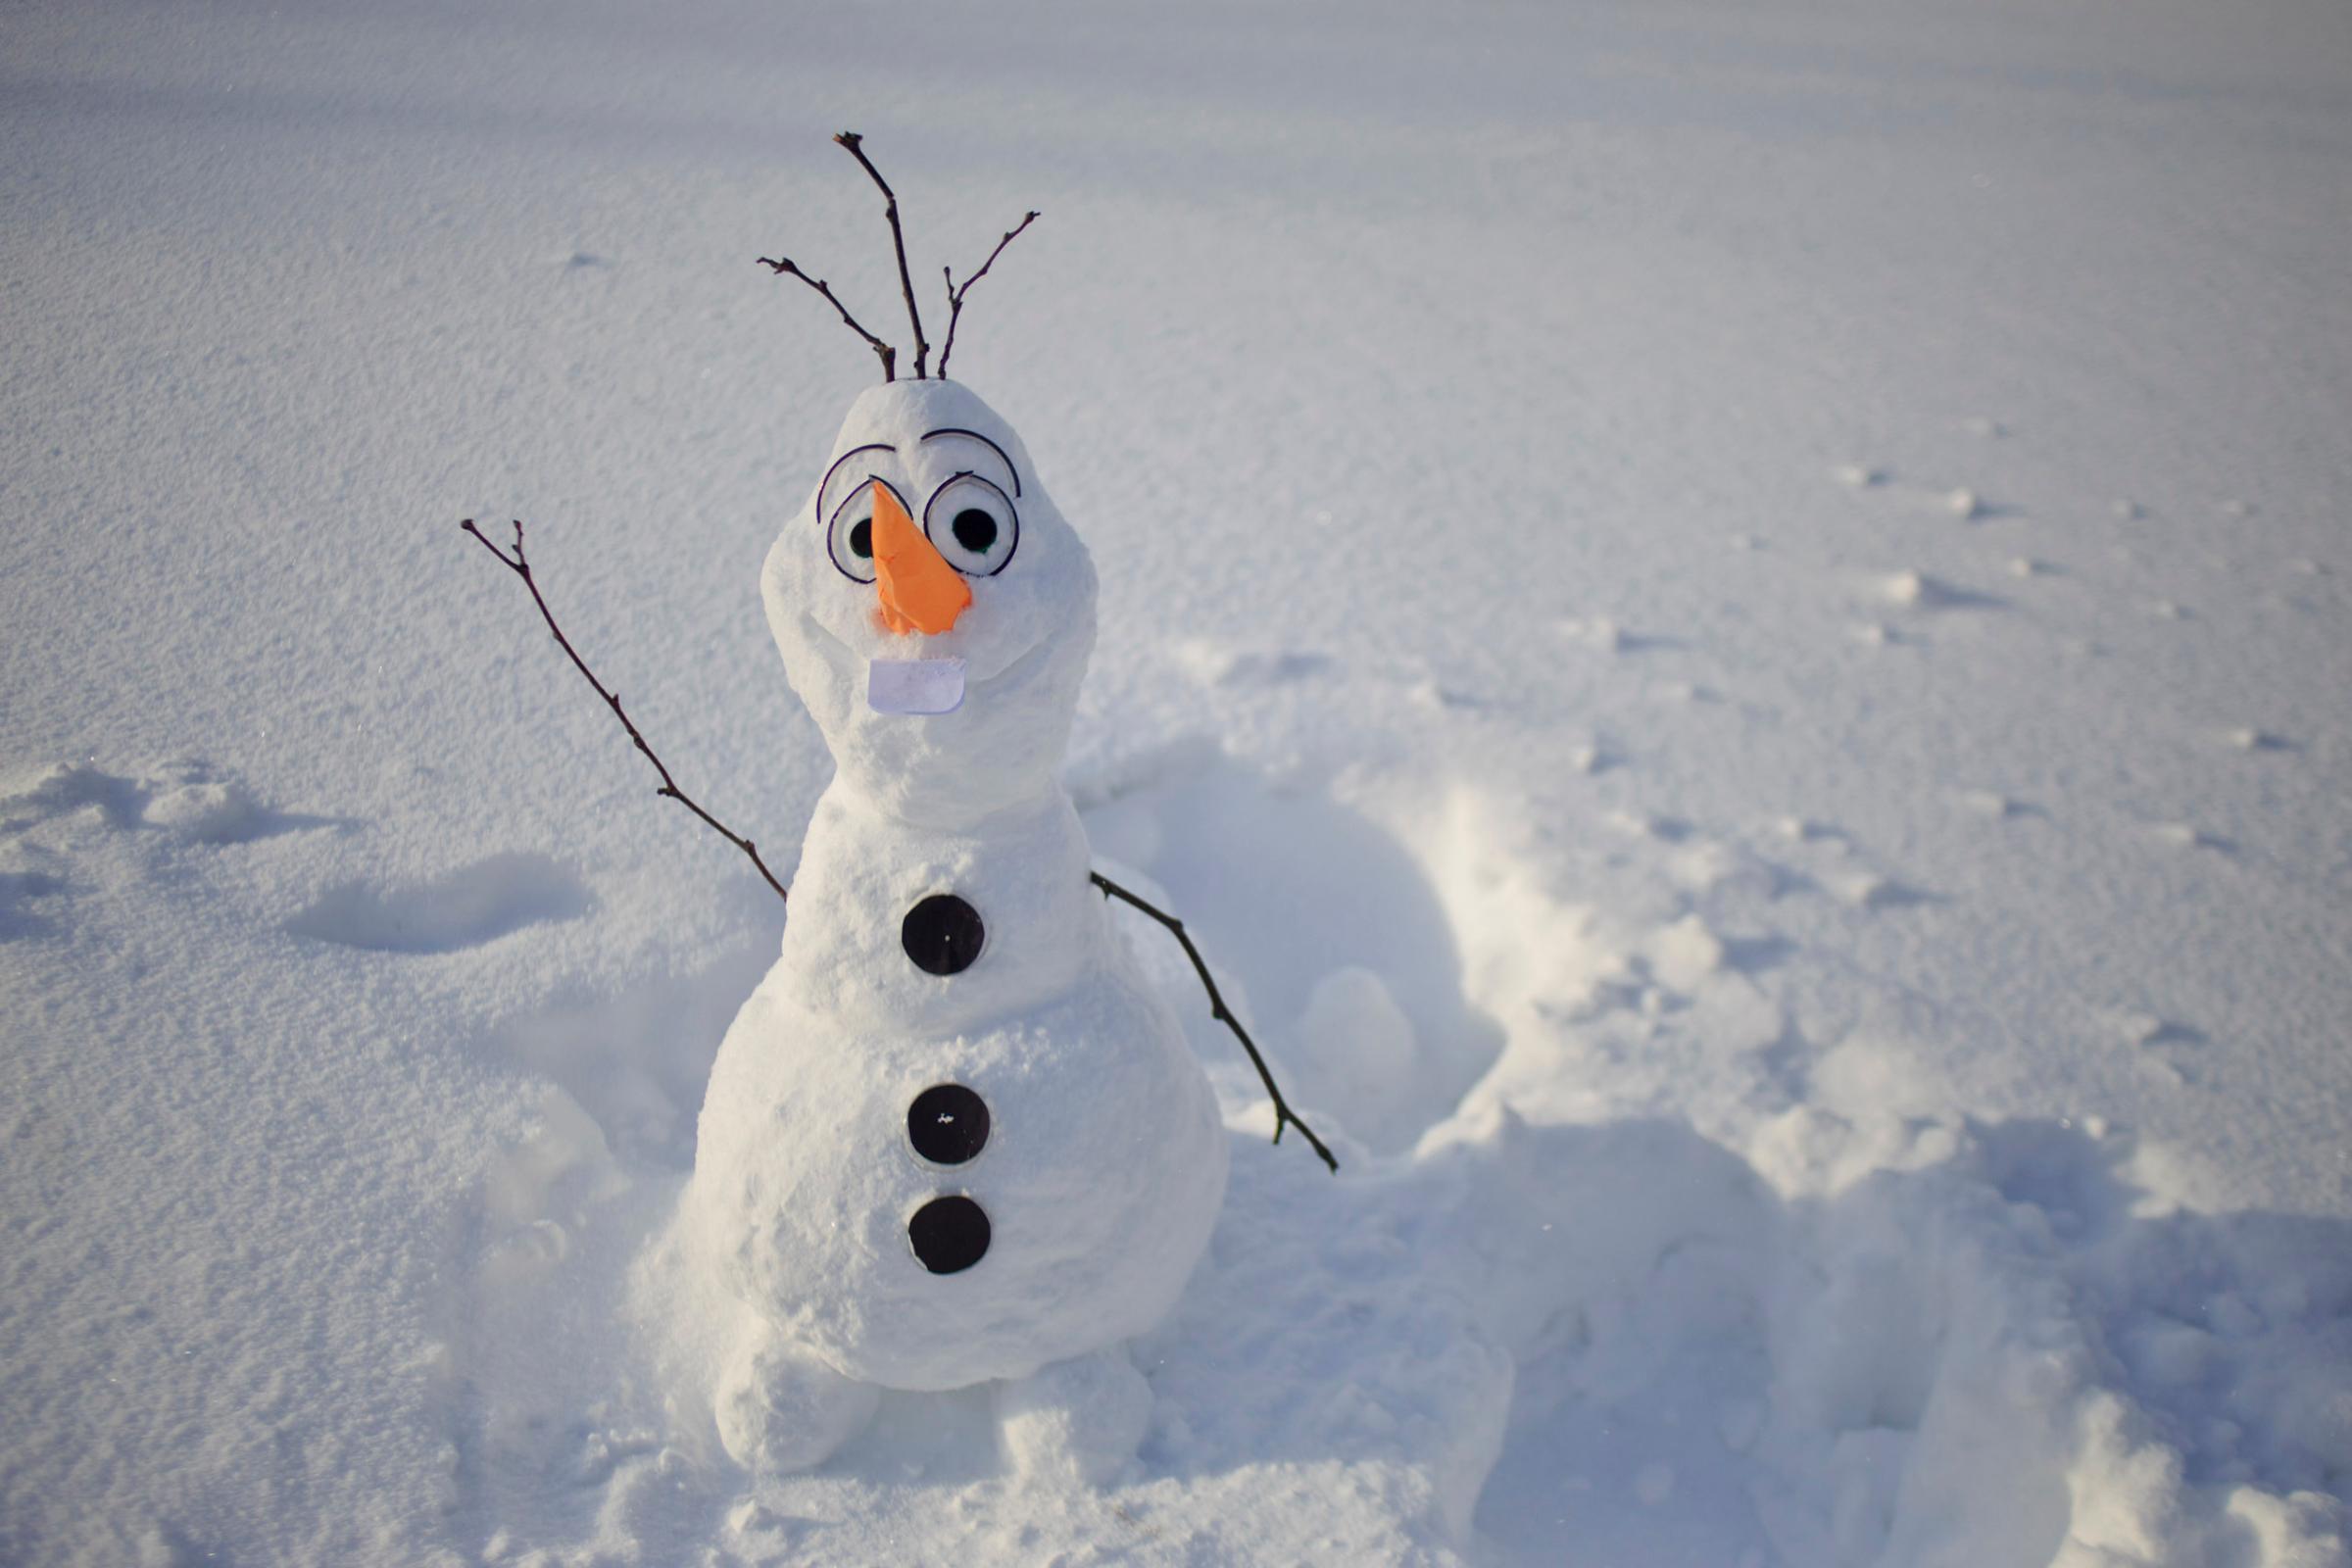 Students from the Grand Valley State University campus built a snowman that looks like the character Olaf from the movie 'Frozen' in Allendale, Mich. on Nov. 18, 2014.